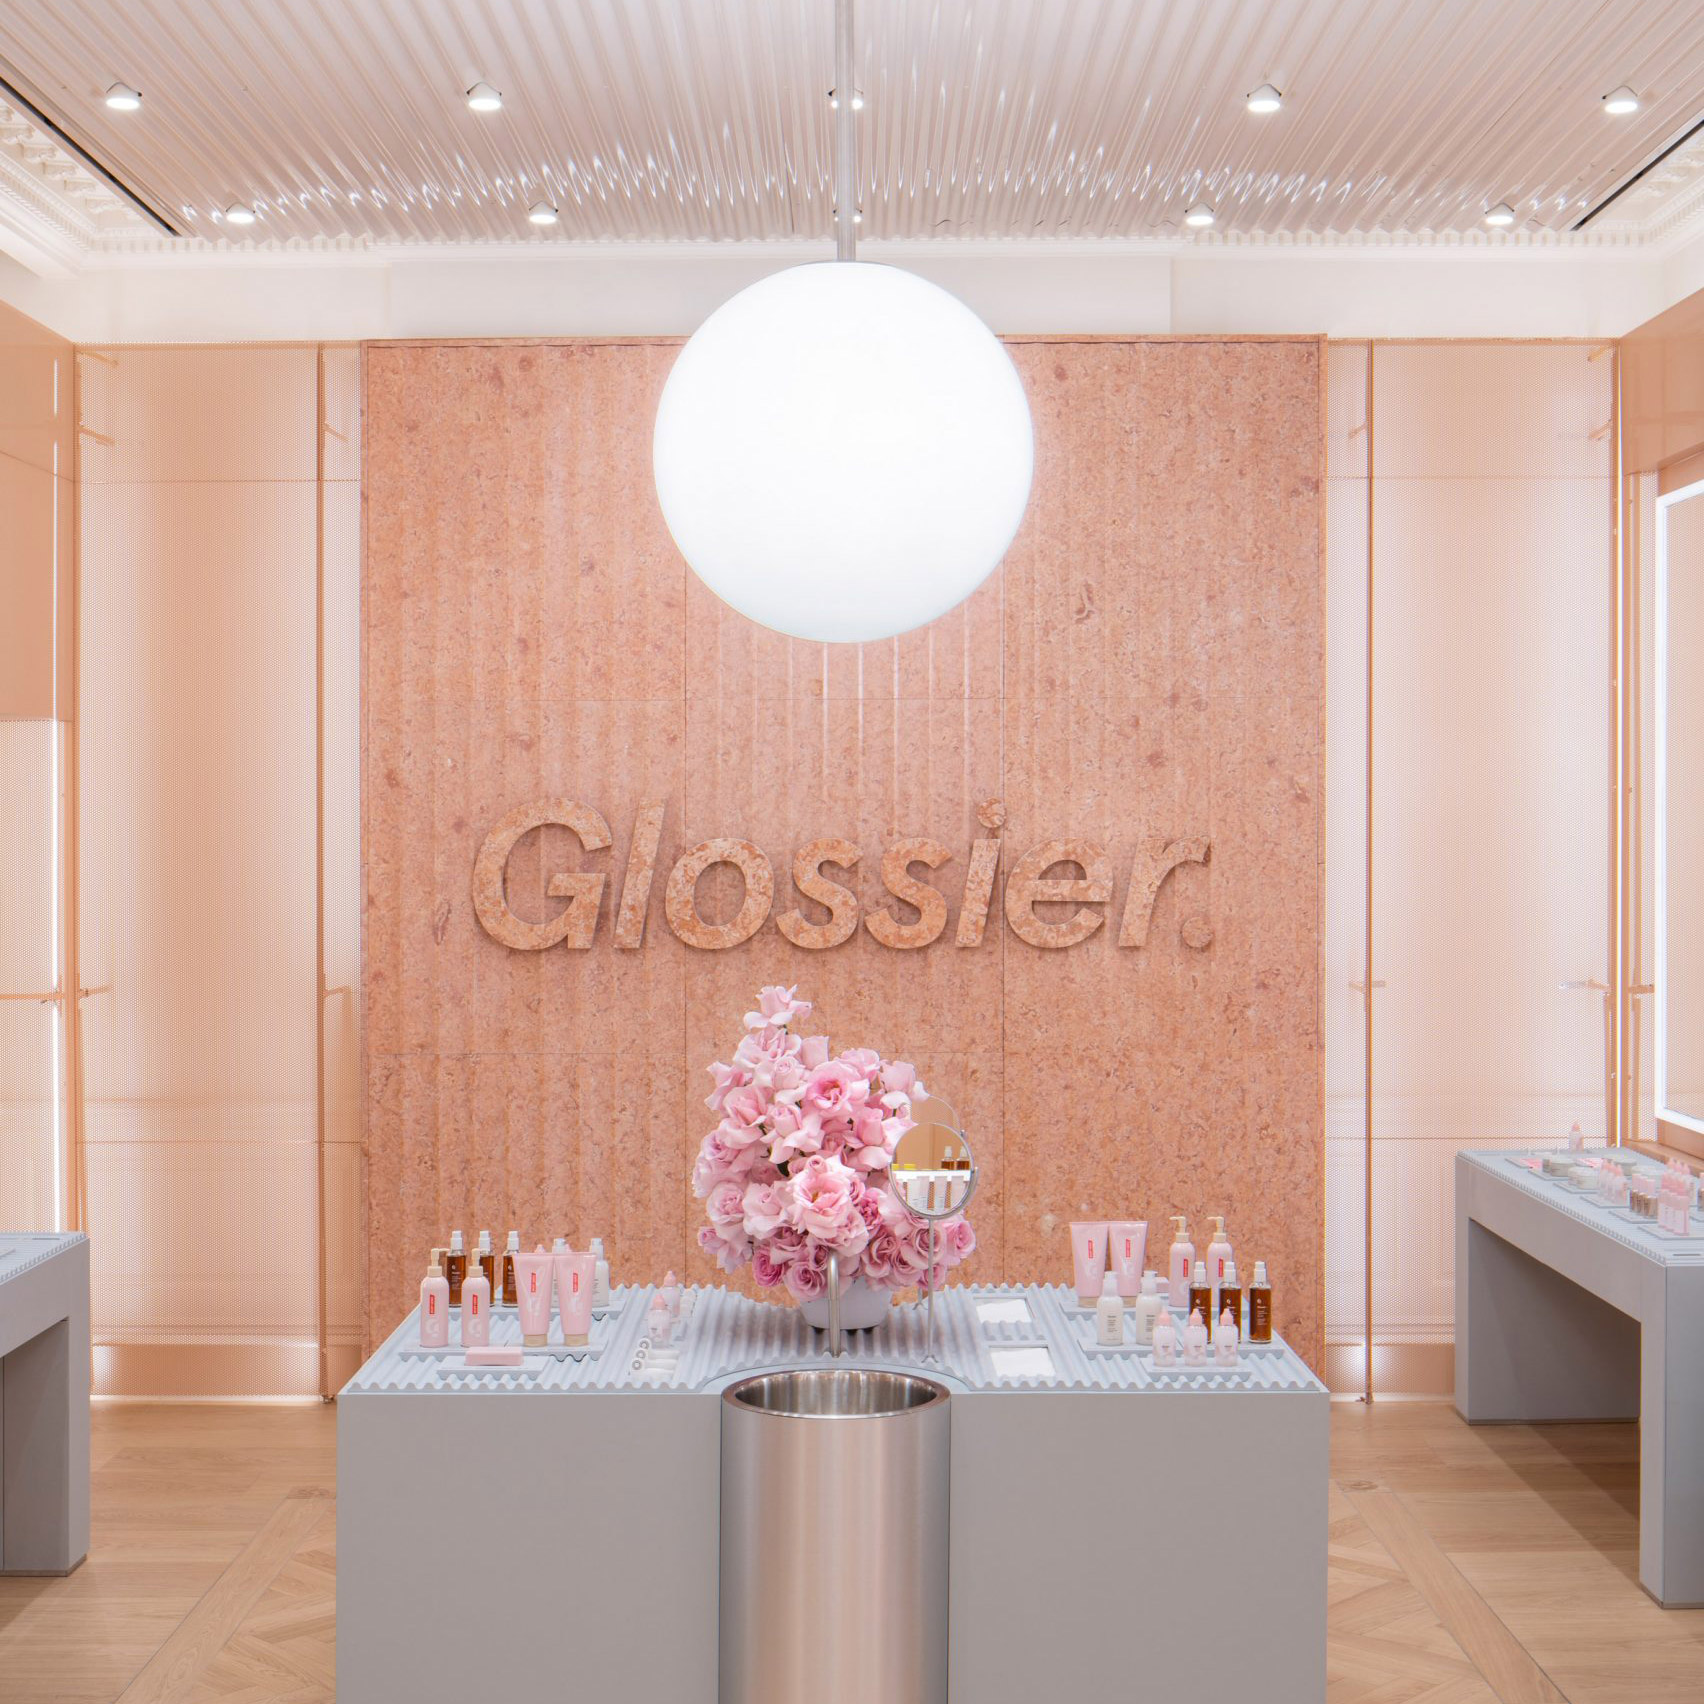 What happened to Glossier